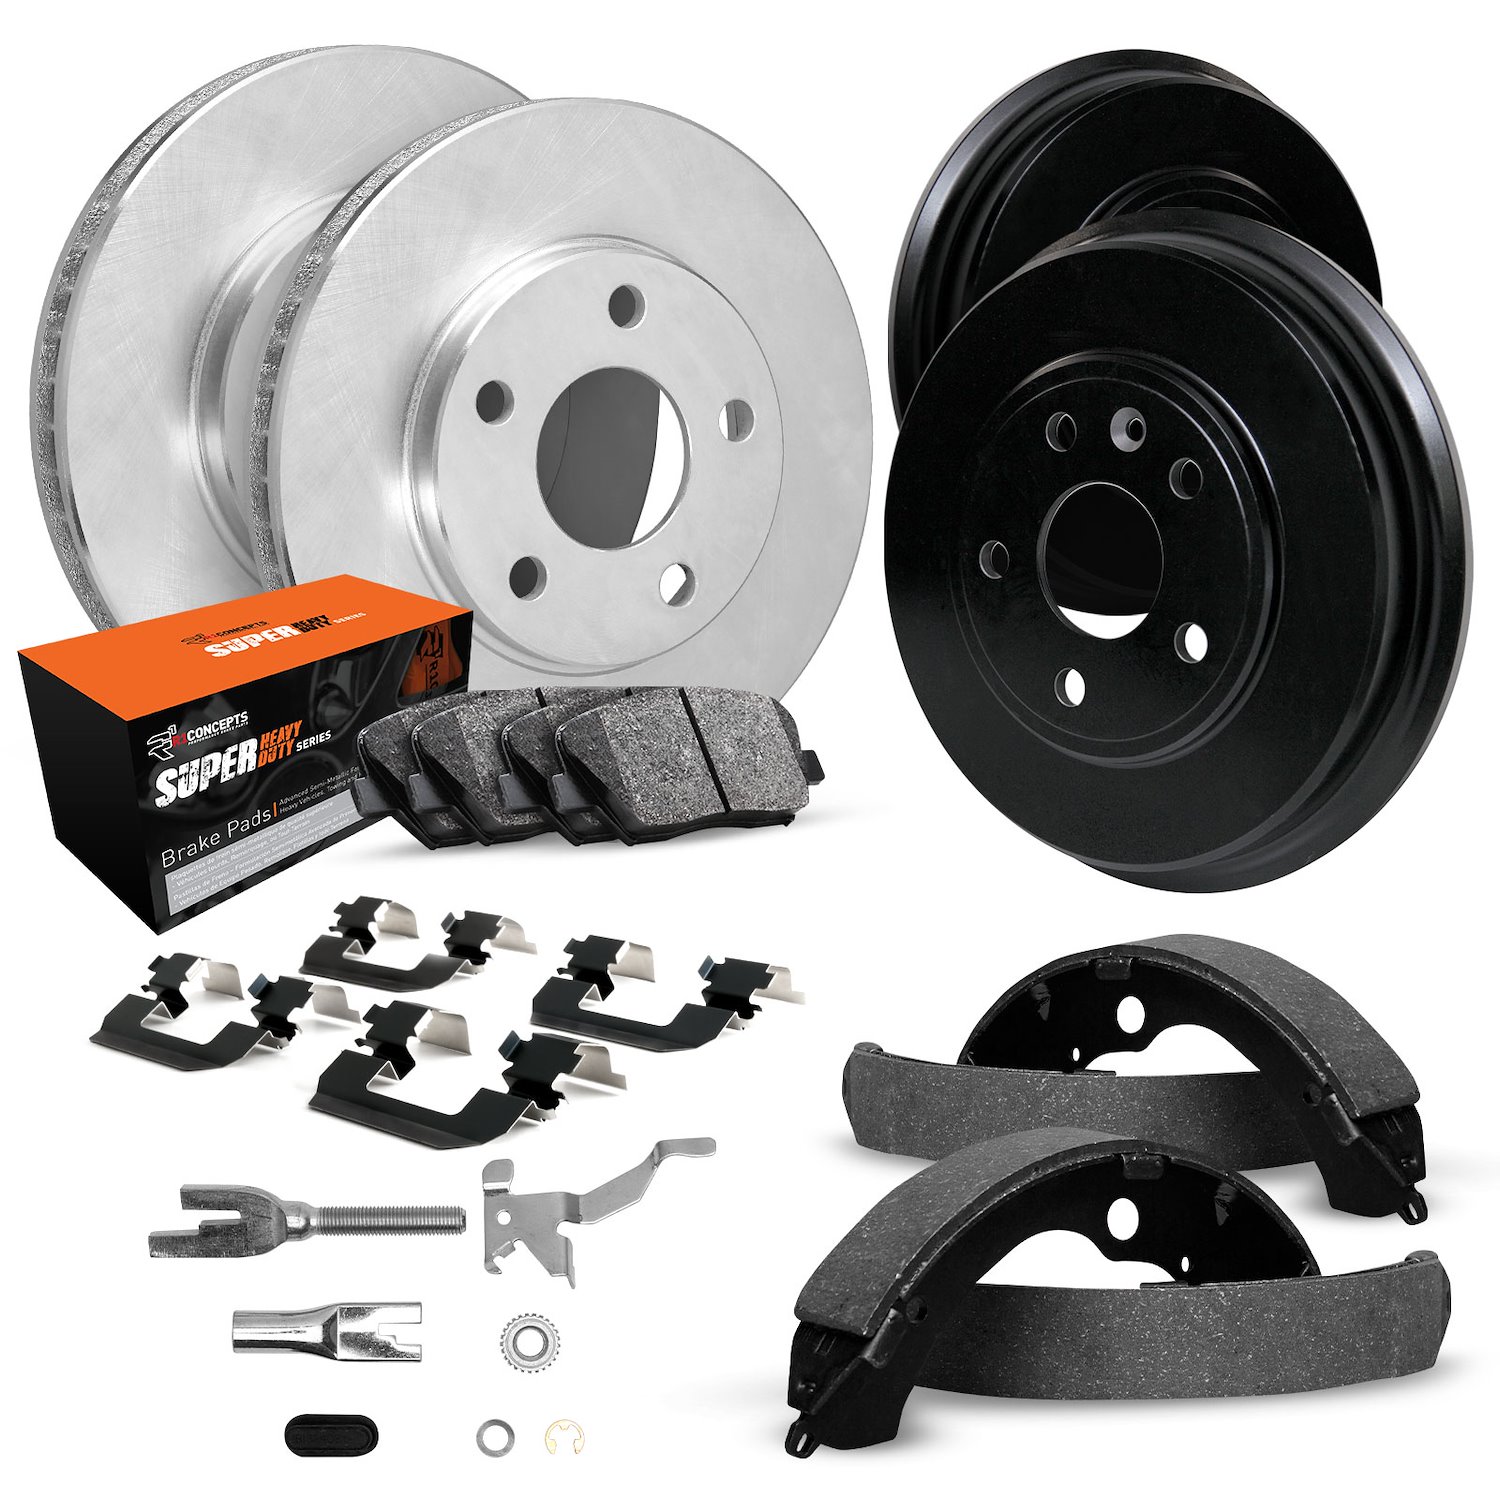 E-Line Blank Brake Rotor & Drum Set w/Super-Duty Pads, Shoes, Hardware, & Adjusters, 1974-1979 Ford/Lincoln/Mercury/Mazda